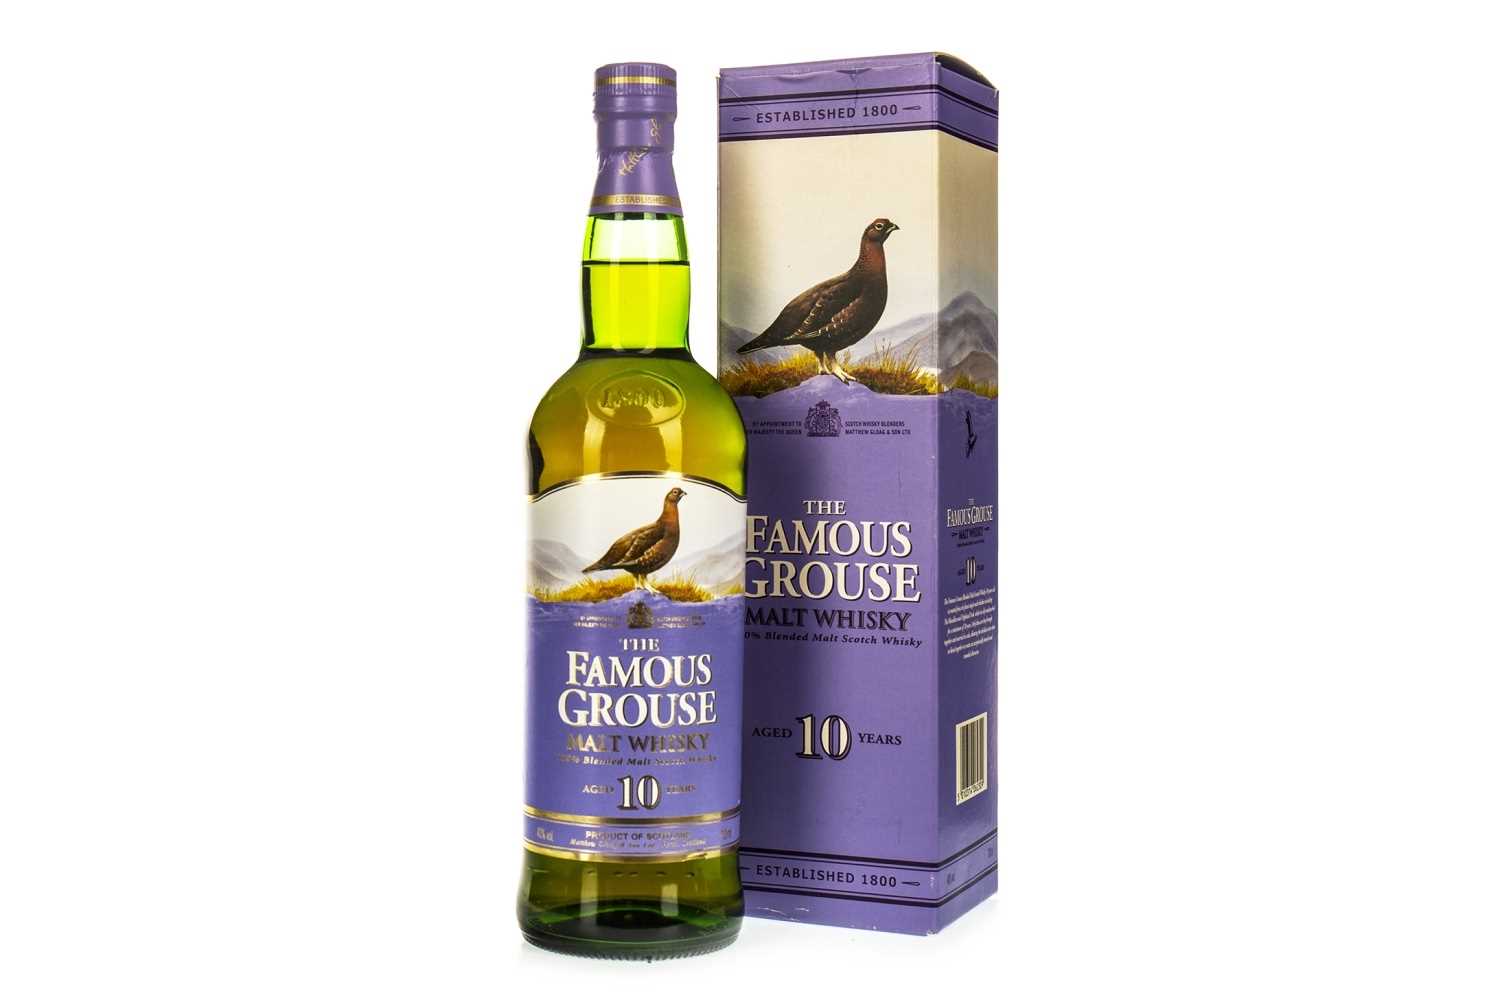 Lot 1306 - FAMOUS GROUSE MALT AGED 10 YEARS